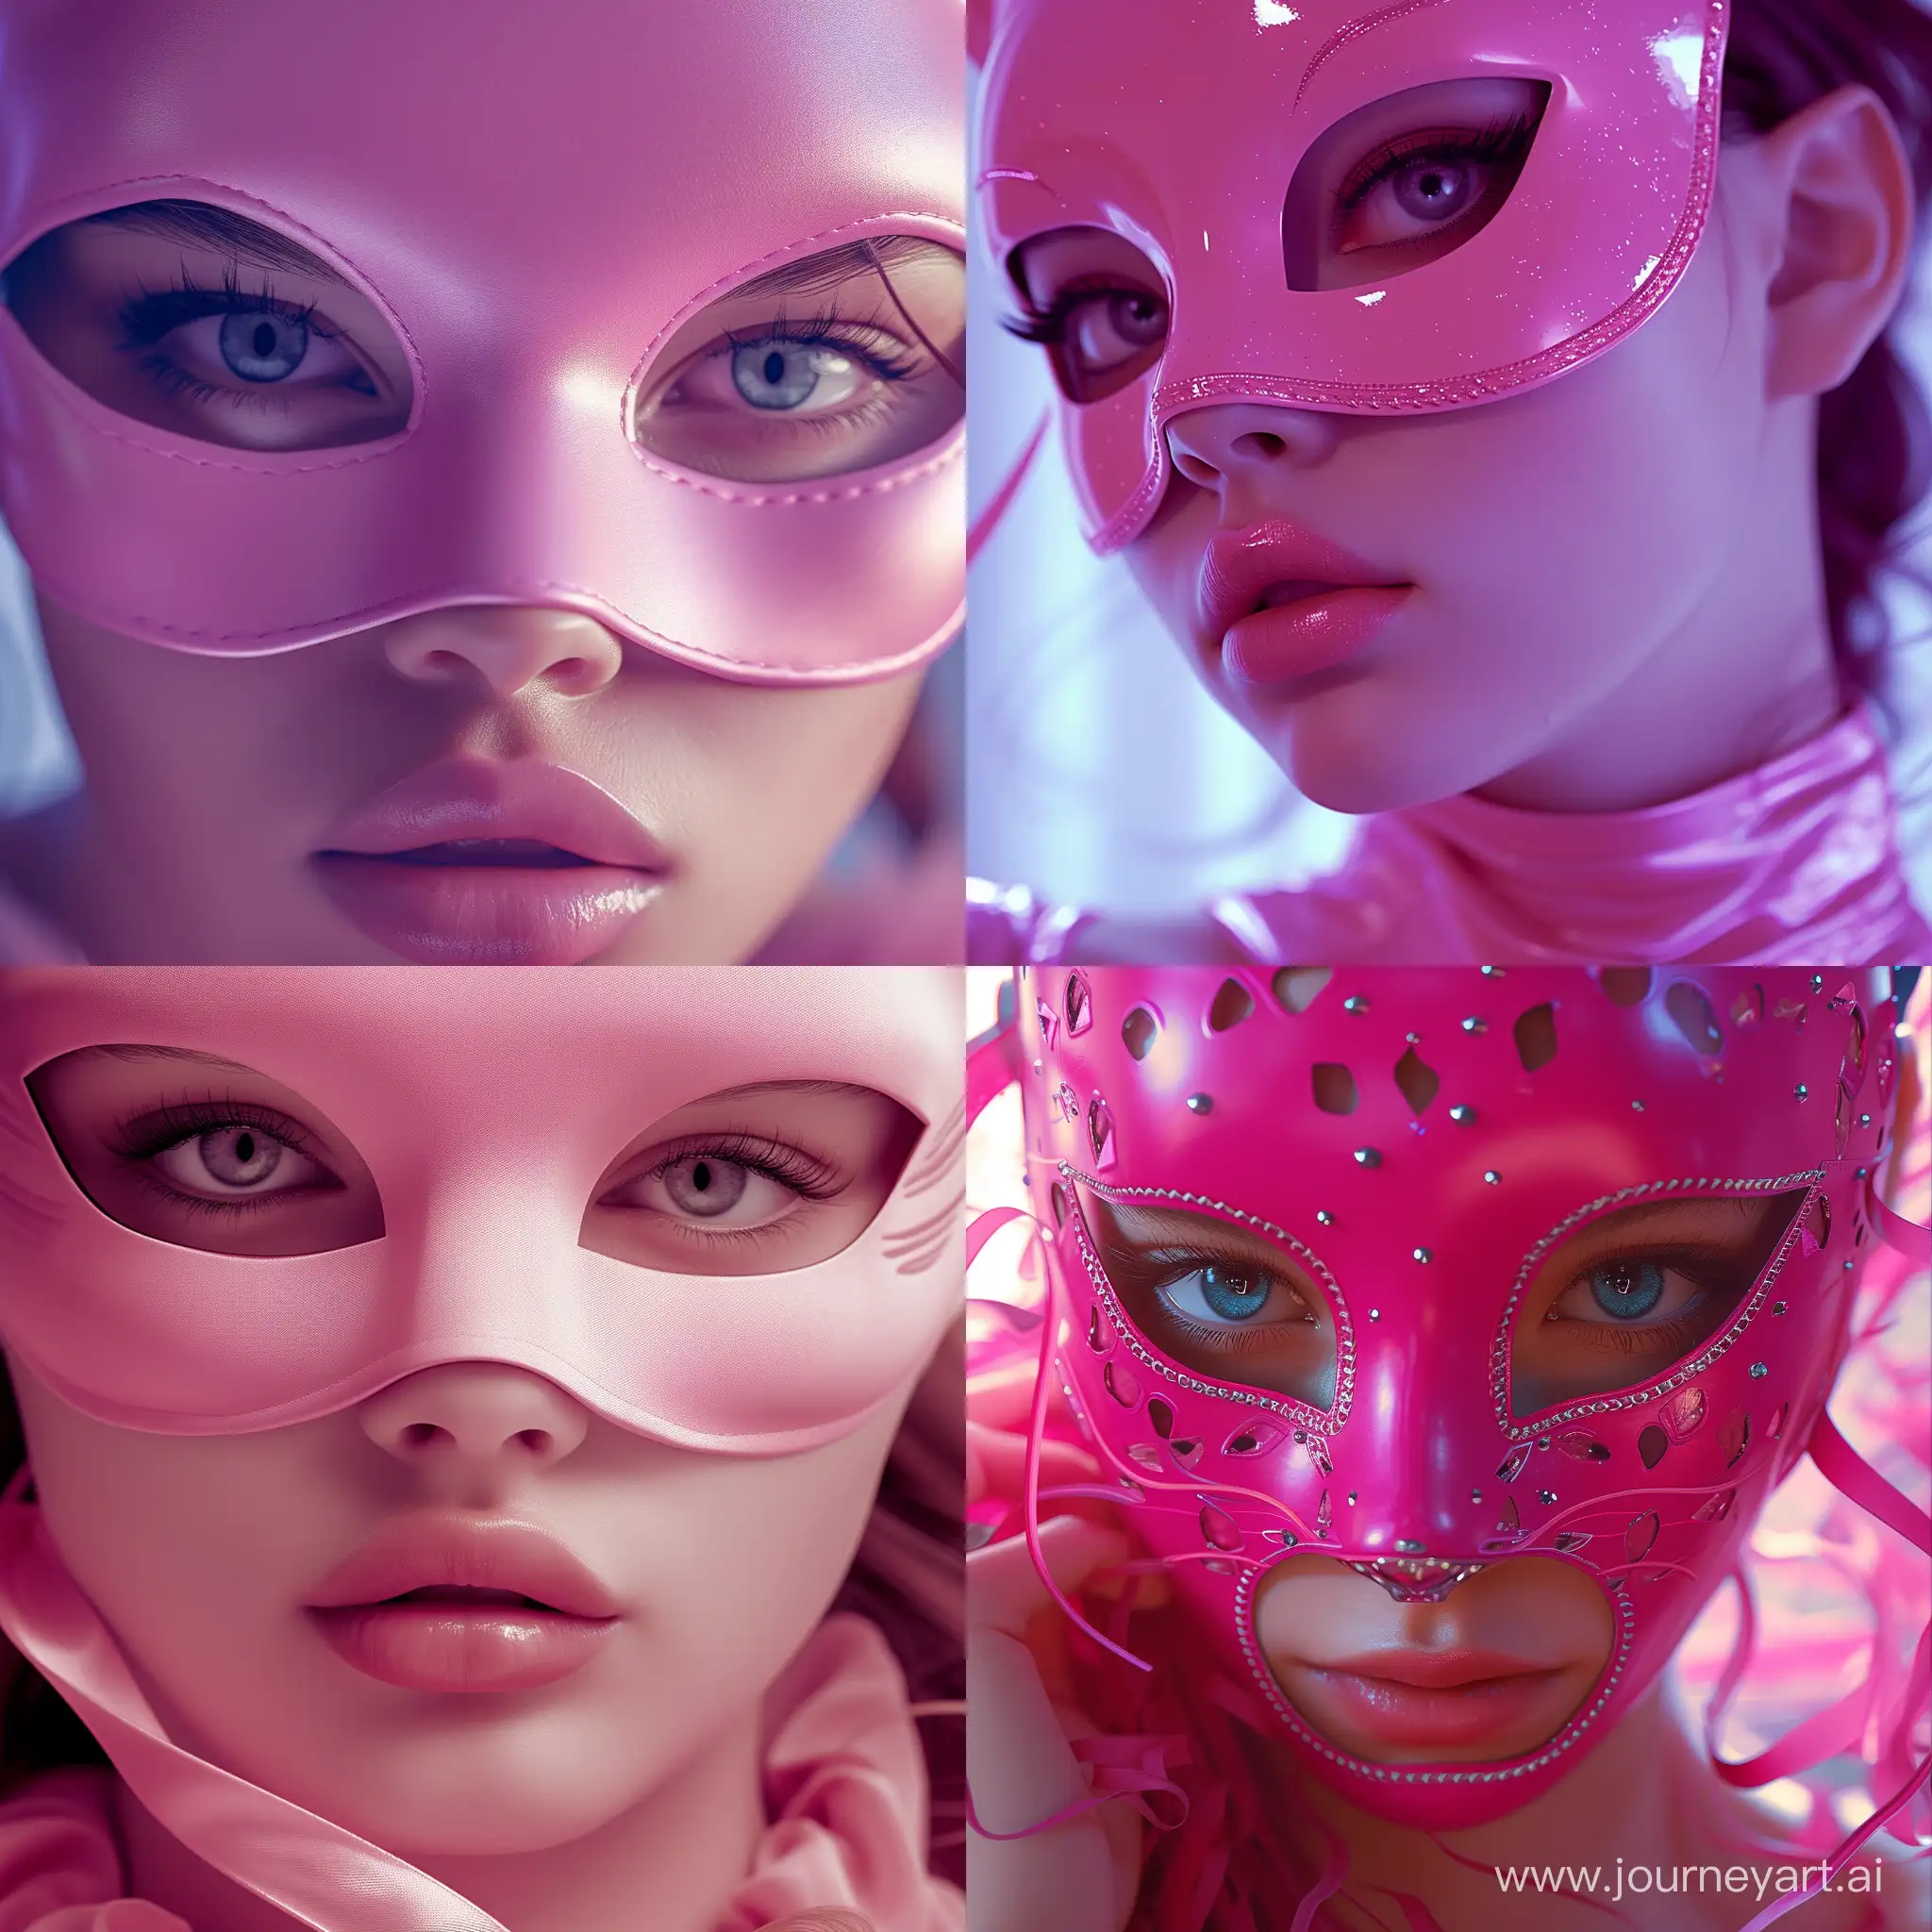 CloseUp-Portrait-Photography-Elegant-Lady-in-Pink-Cat-Woman-Mask-by-Artists-Sergio-Lopez-Natalie-Shau-James-Jean-and-Salvador-Dali-in-4k-and-8k